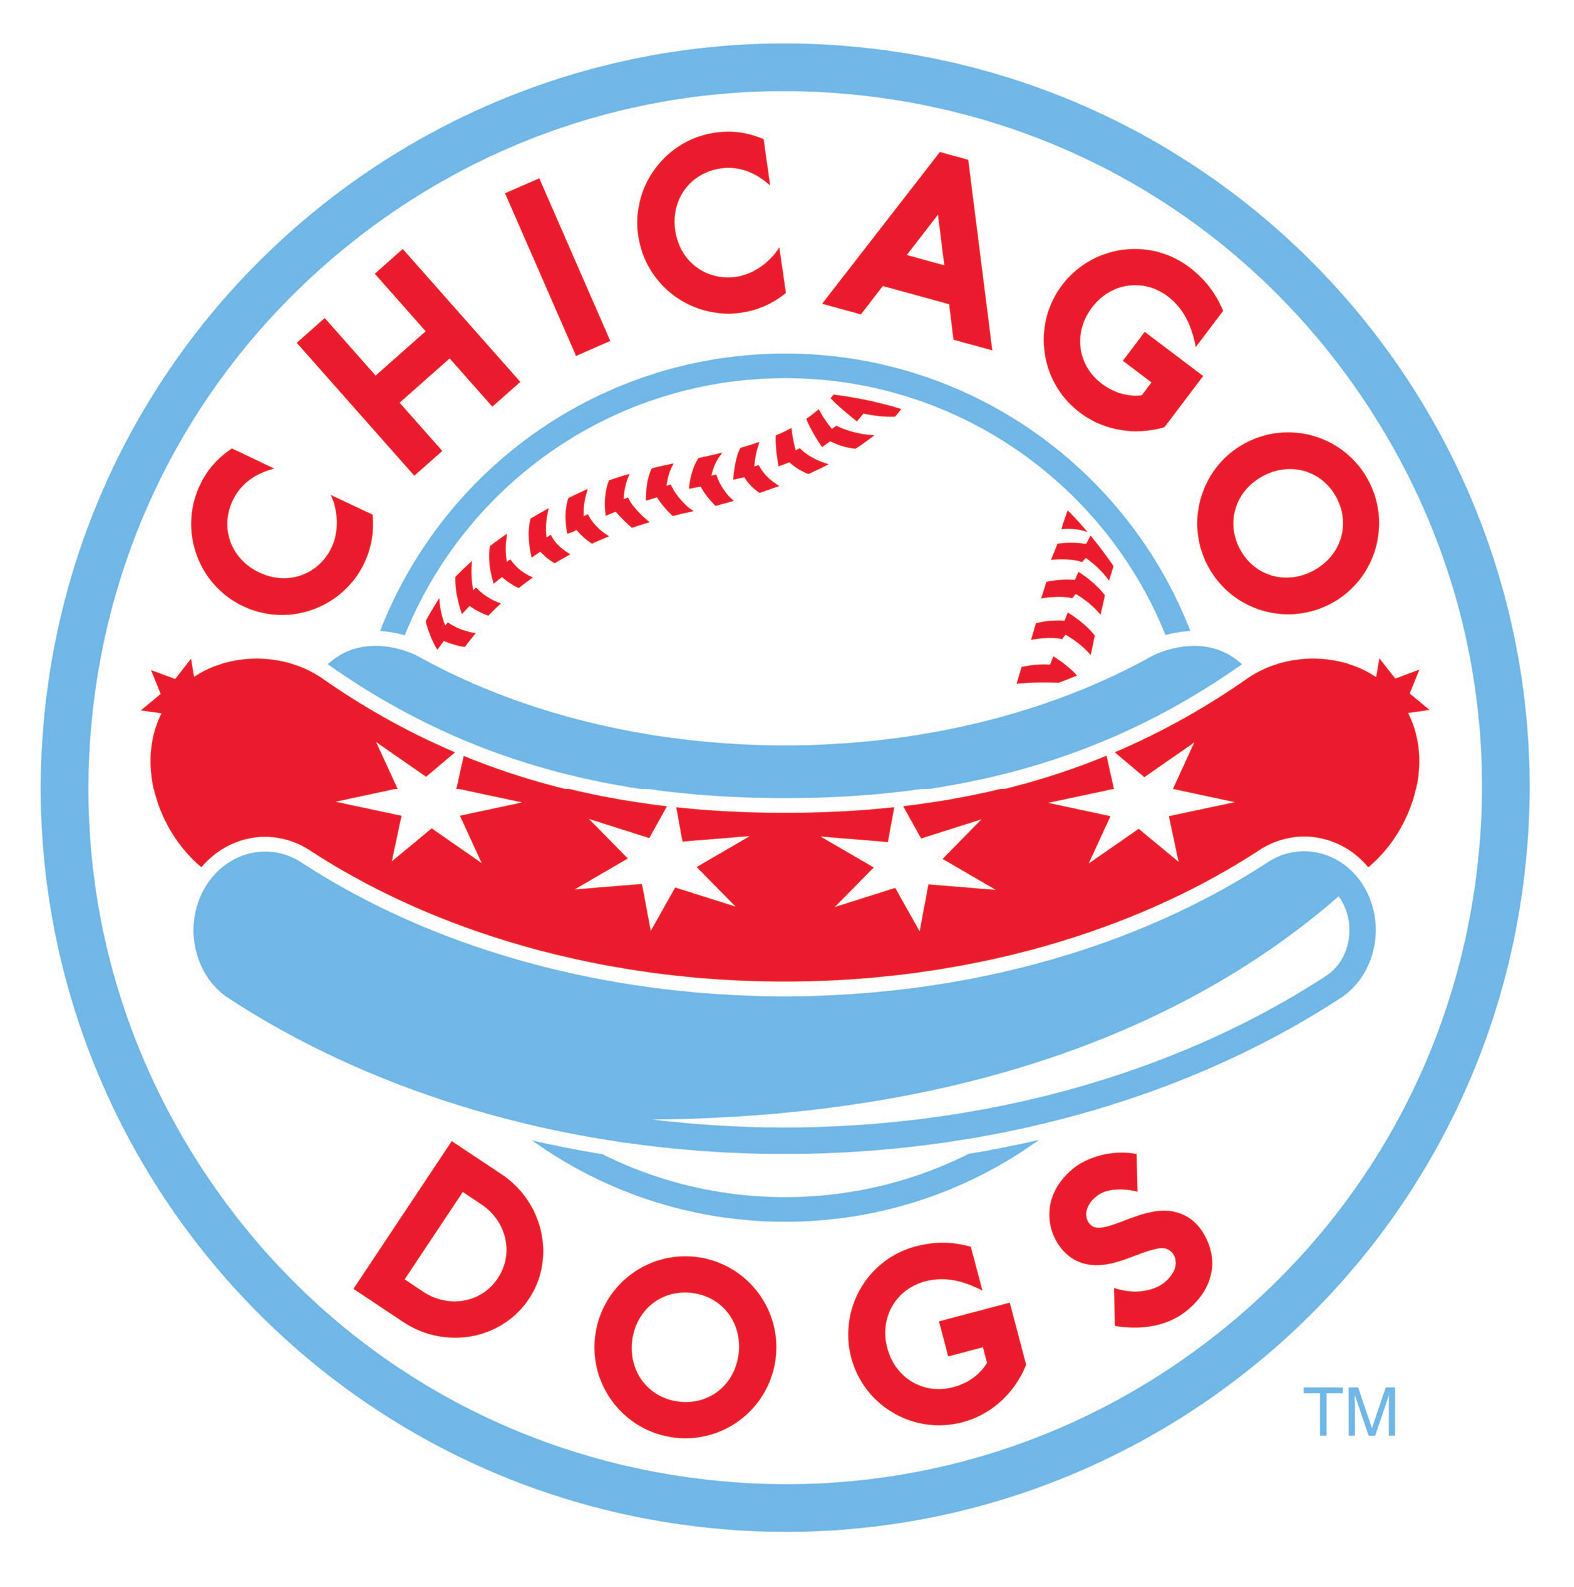 Dogs Drop Close Game 2 - OurSports Central